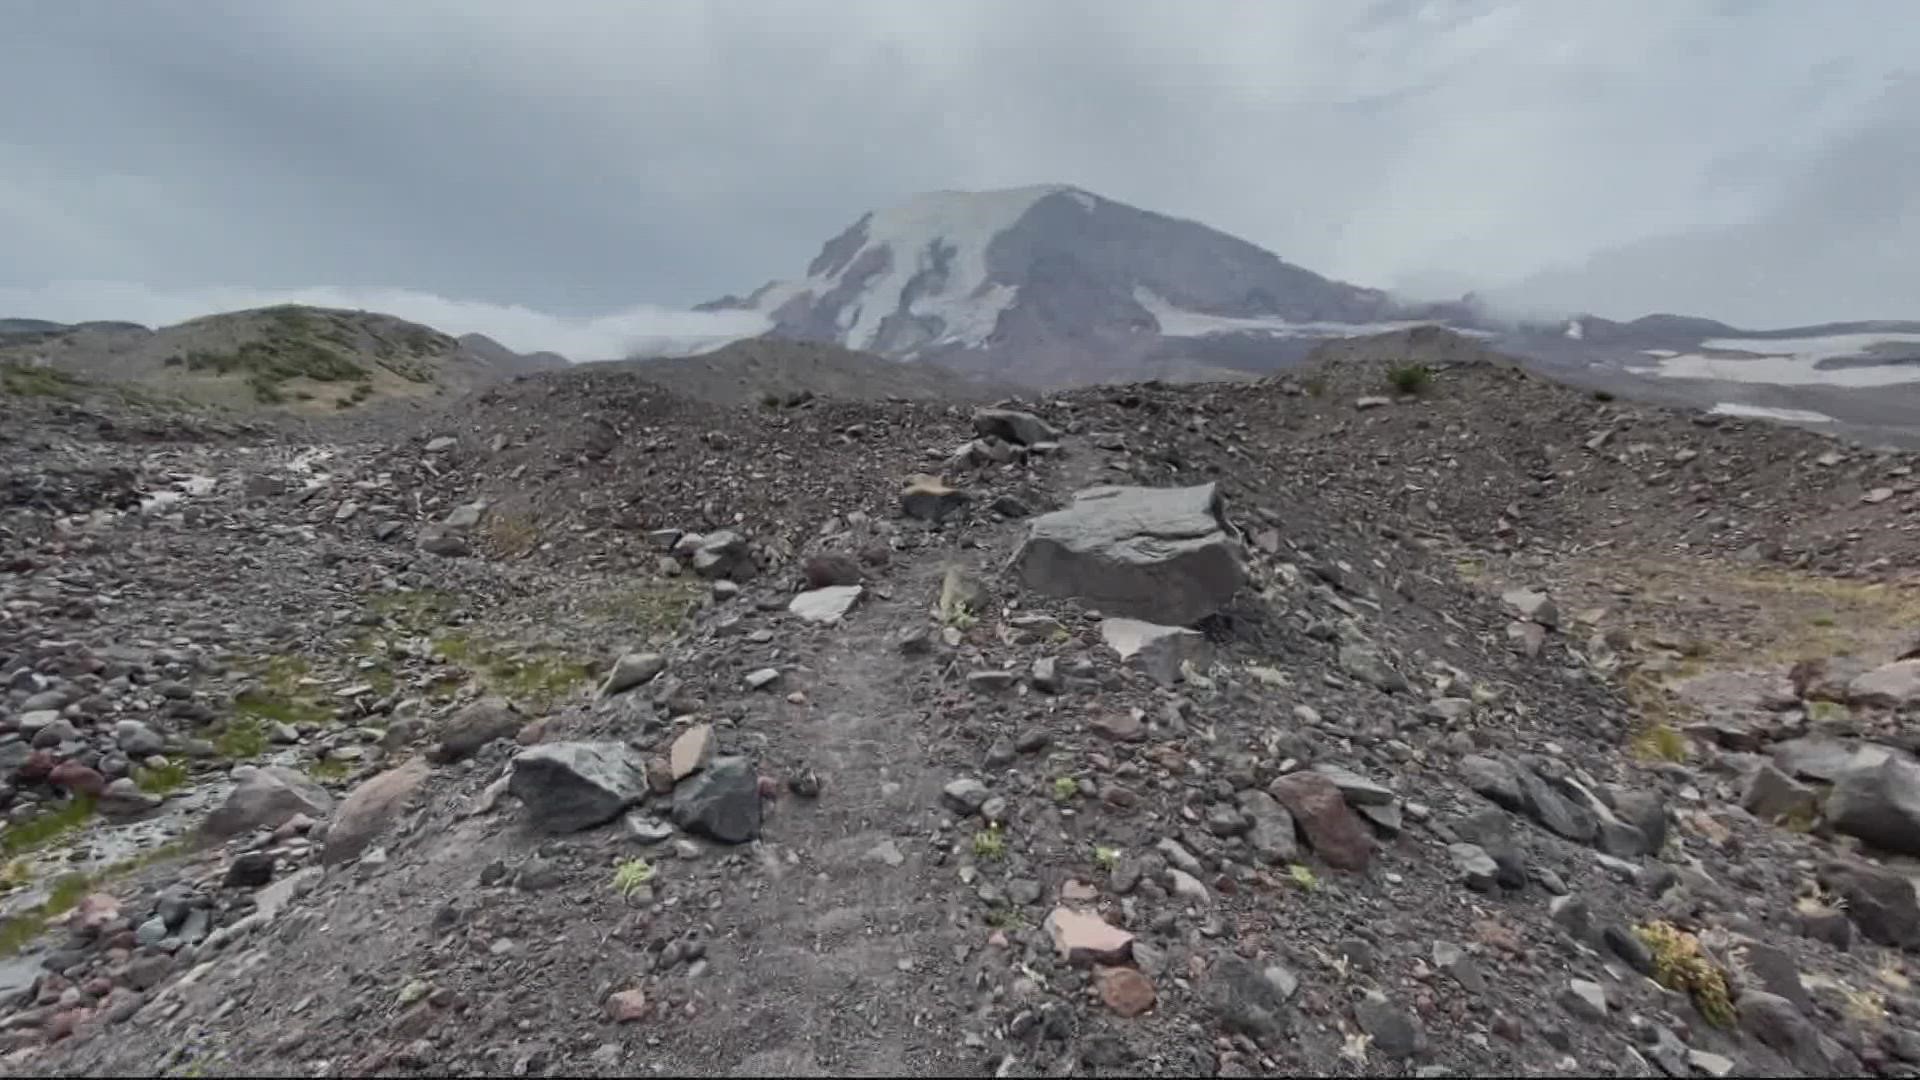 KGW chief meteorologist Matt Zaffino takes us along on his backpacking trip up Mount Adams.